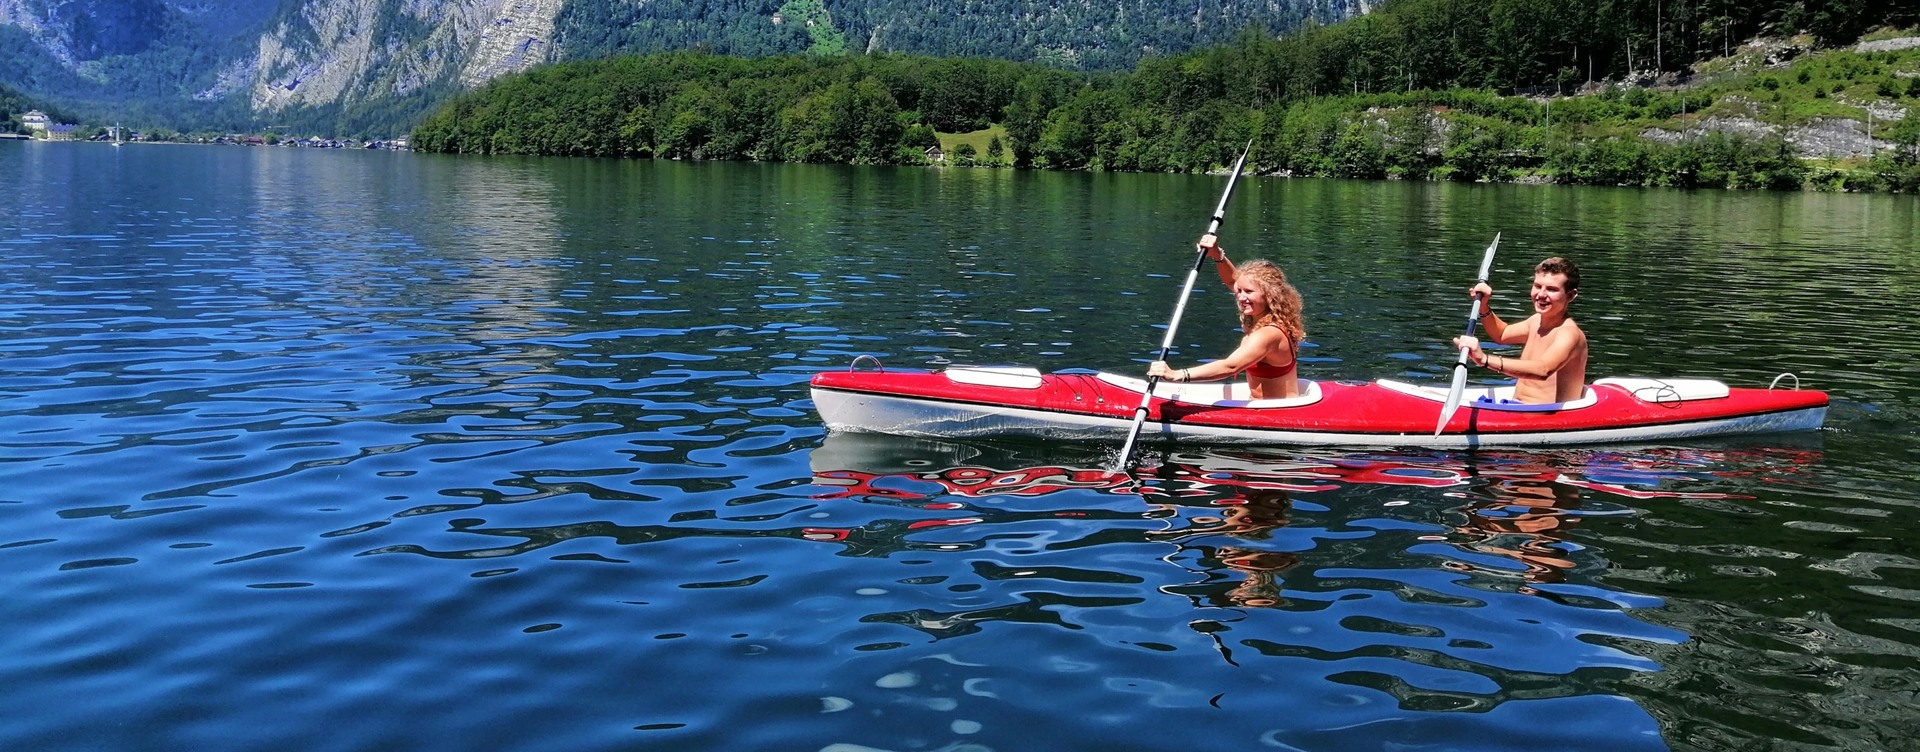 Experience the best activities
in and around the cosy village of Obertraun